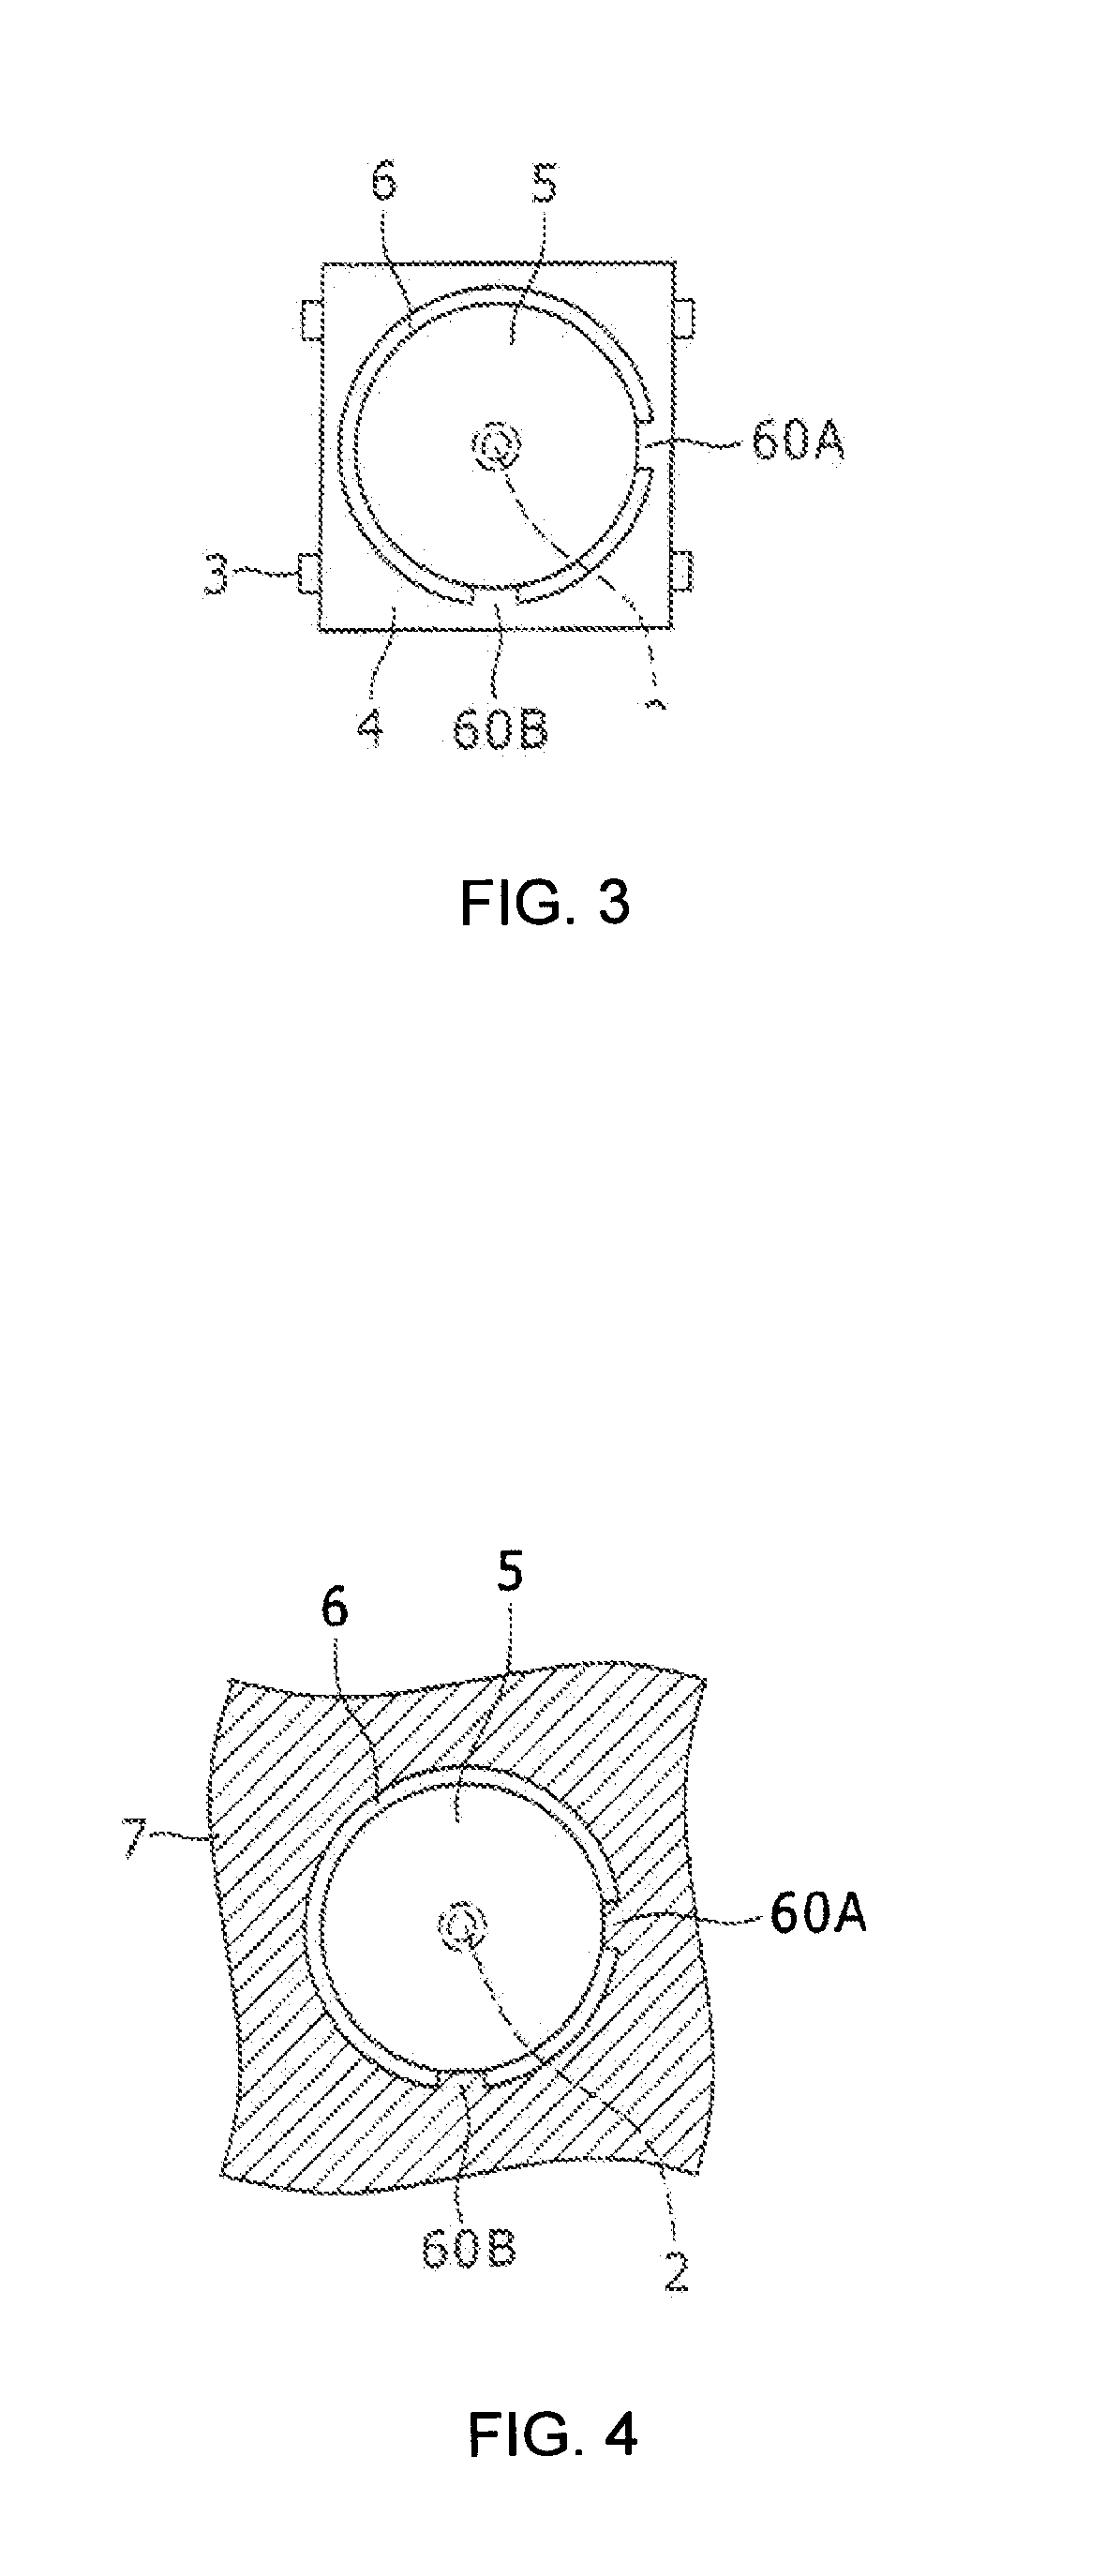 Light emitting diode with a step section between the base and the lens of the diode